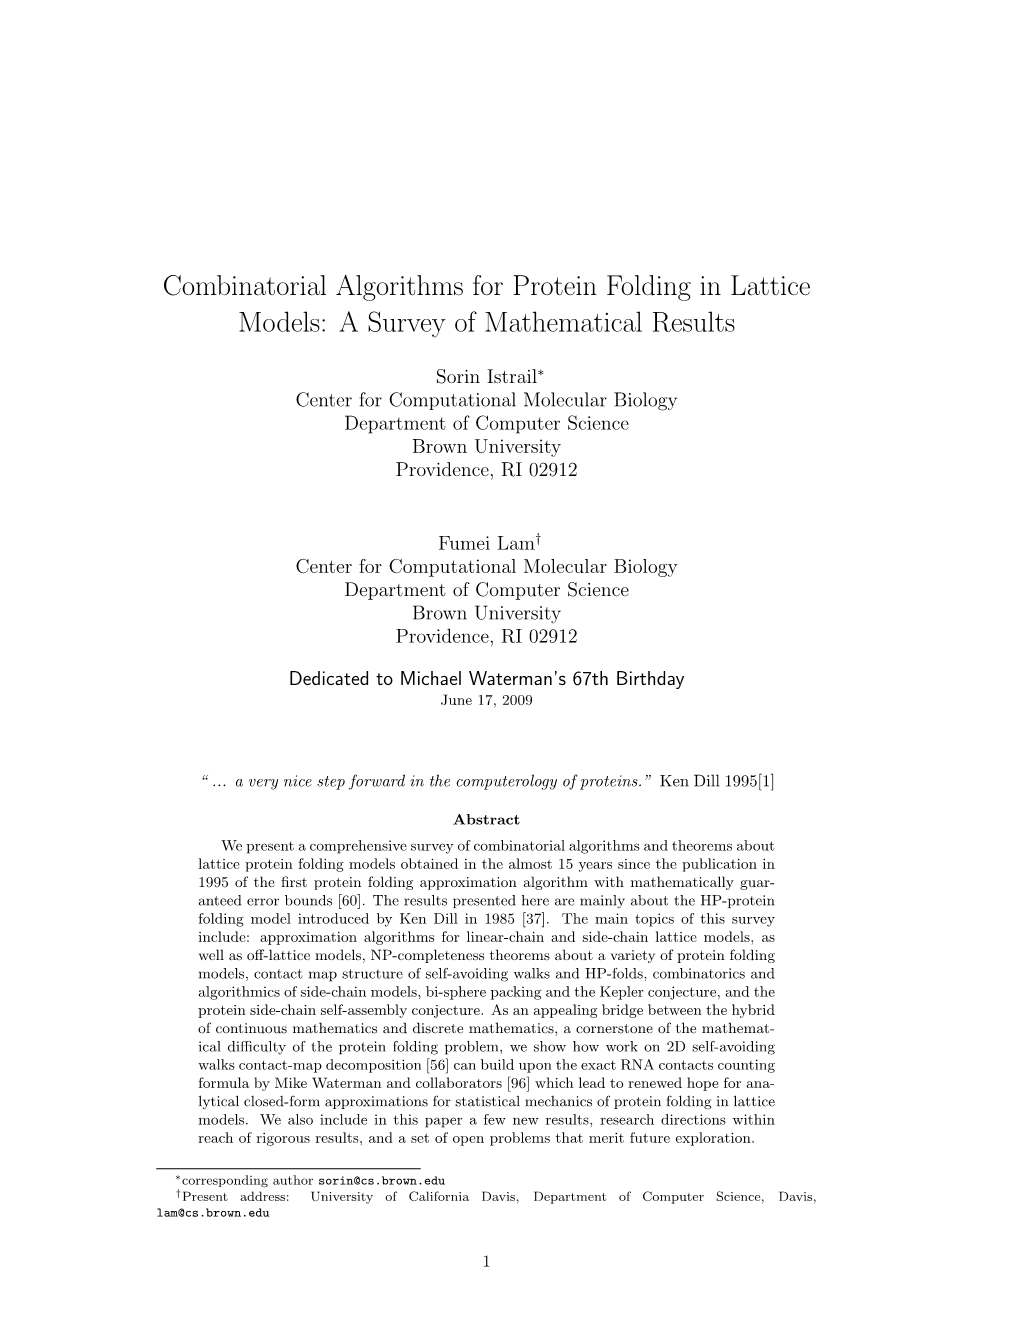 Combinatorial Algorithms for Protein Folding in Lattice Models: a Survey of Mathematical Results